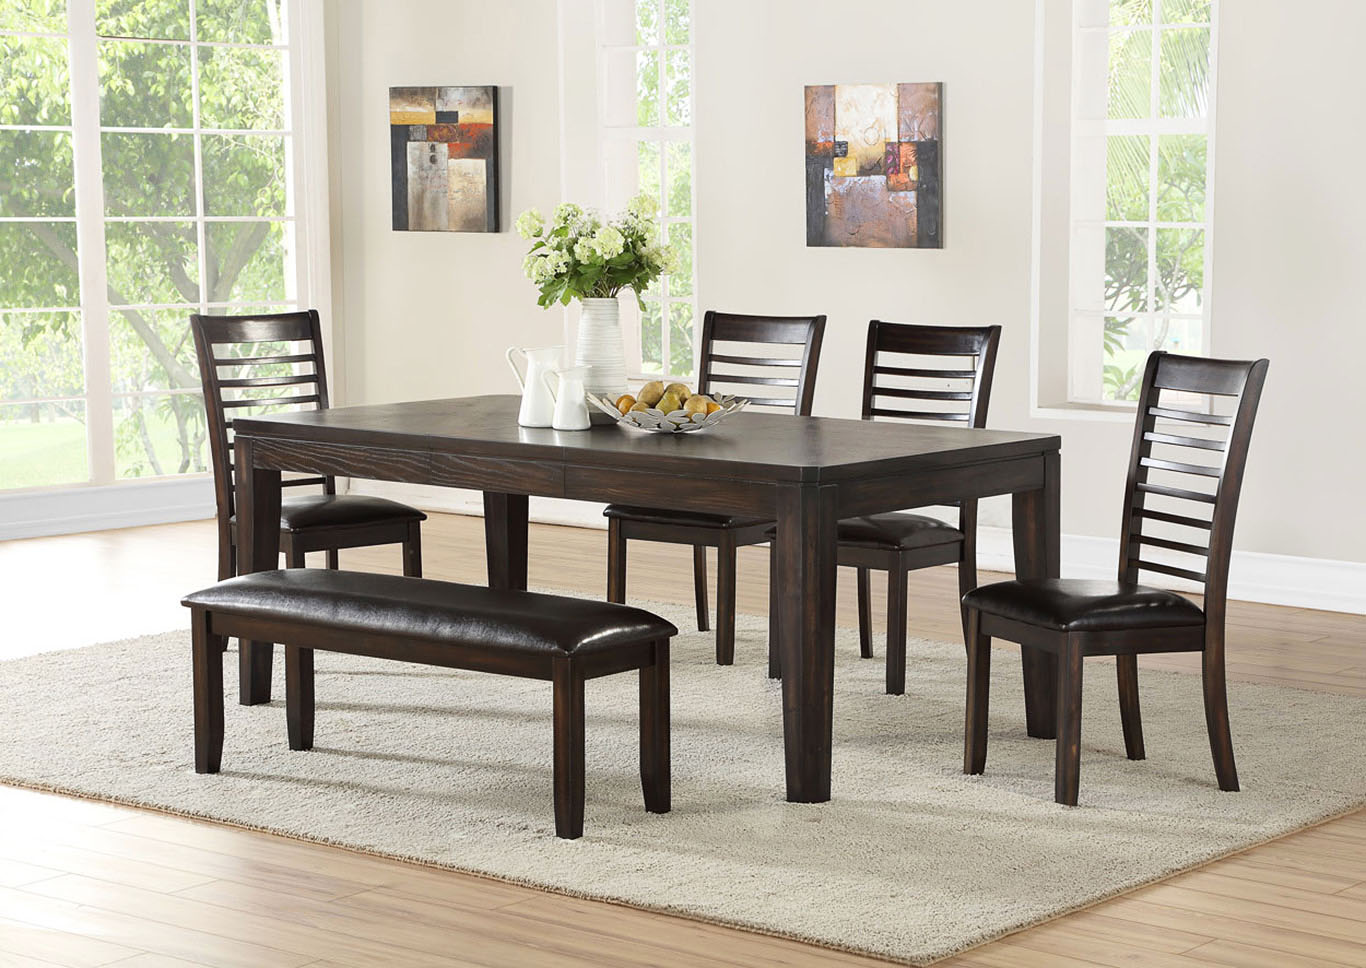 Ally Brown Rectangular Dining Table,Steve Silver